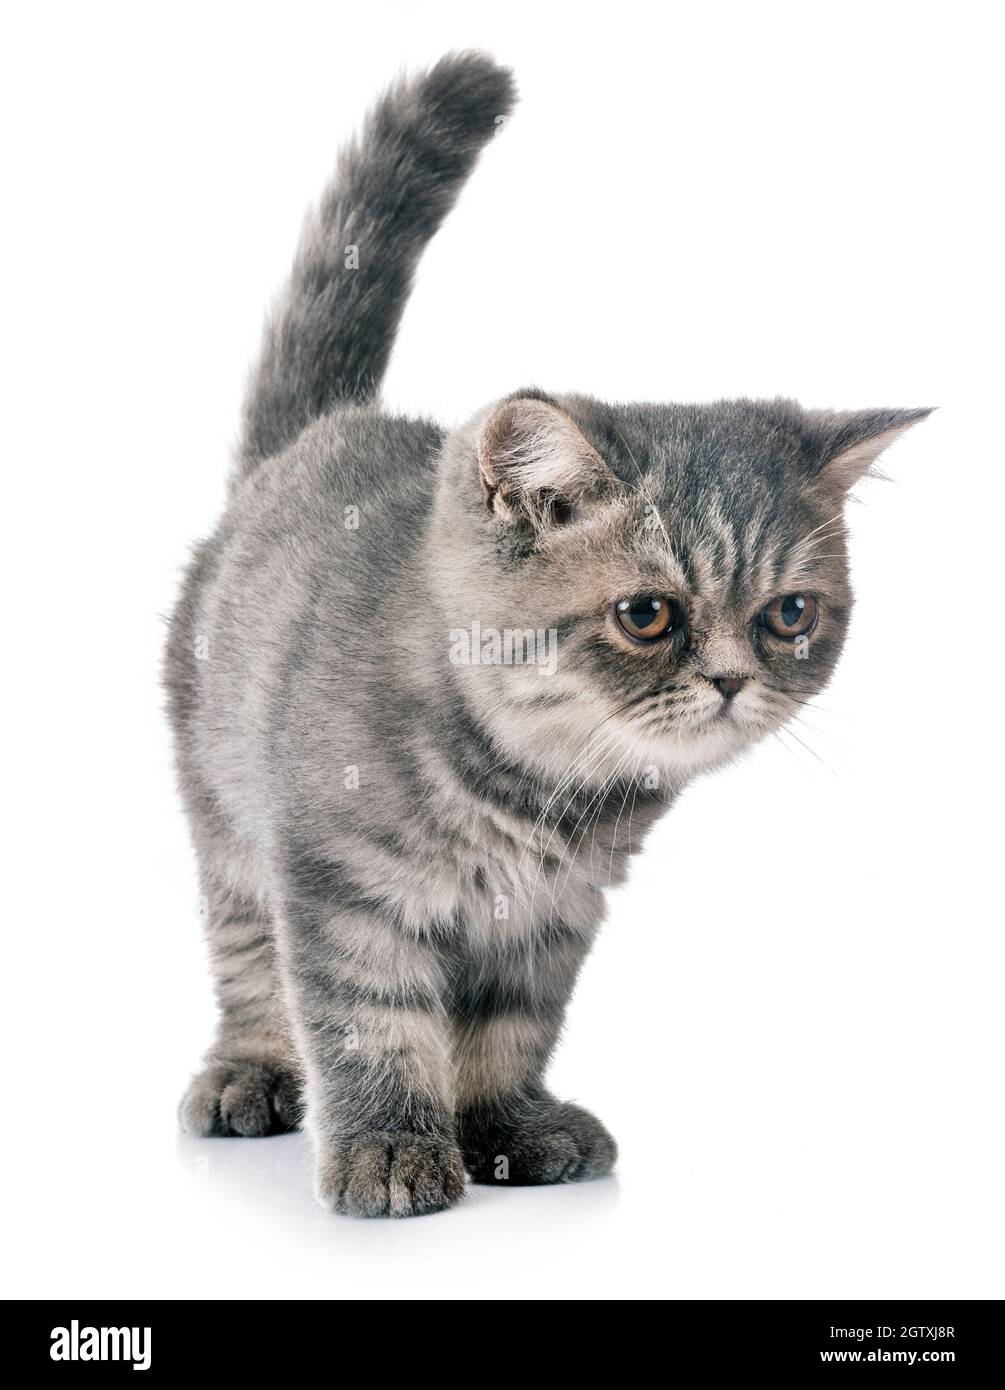 Cat Looking Away Over White Background Stock Photo